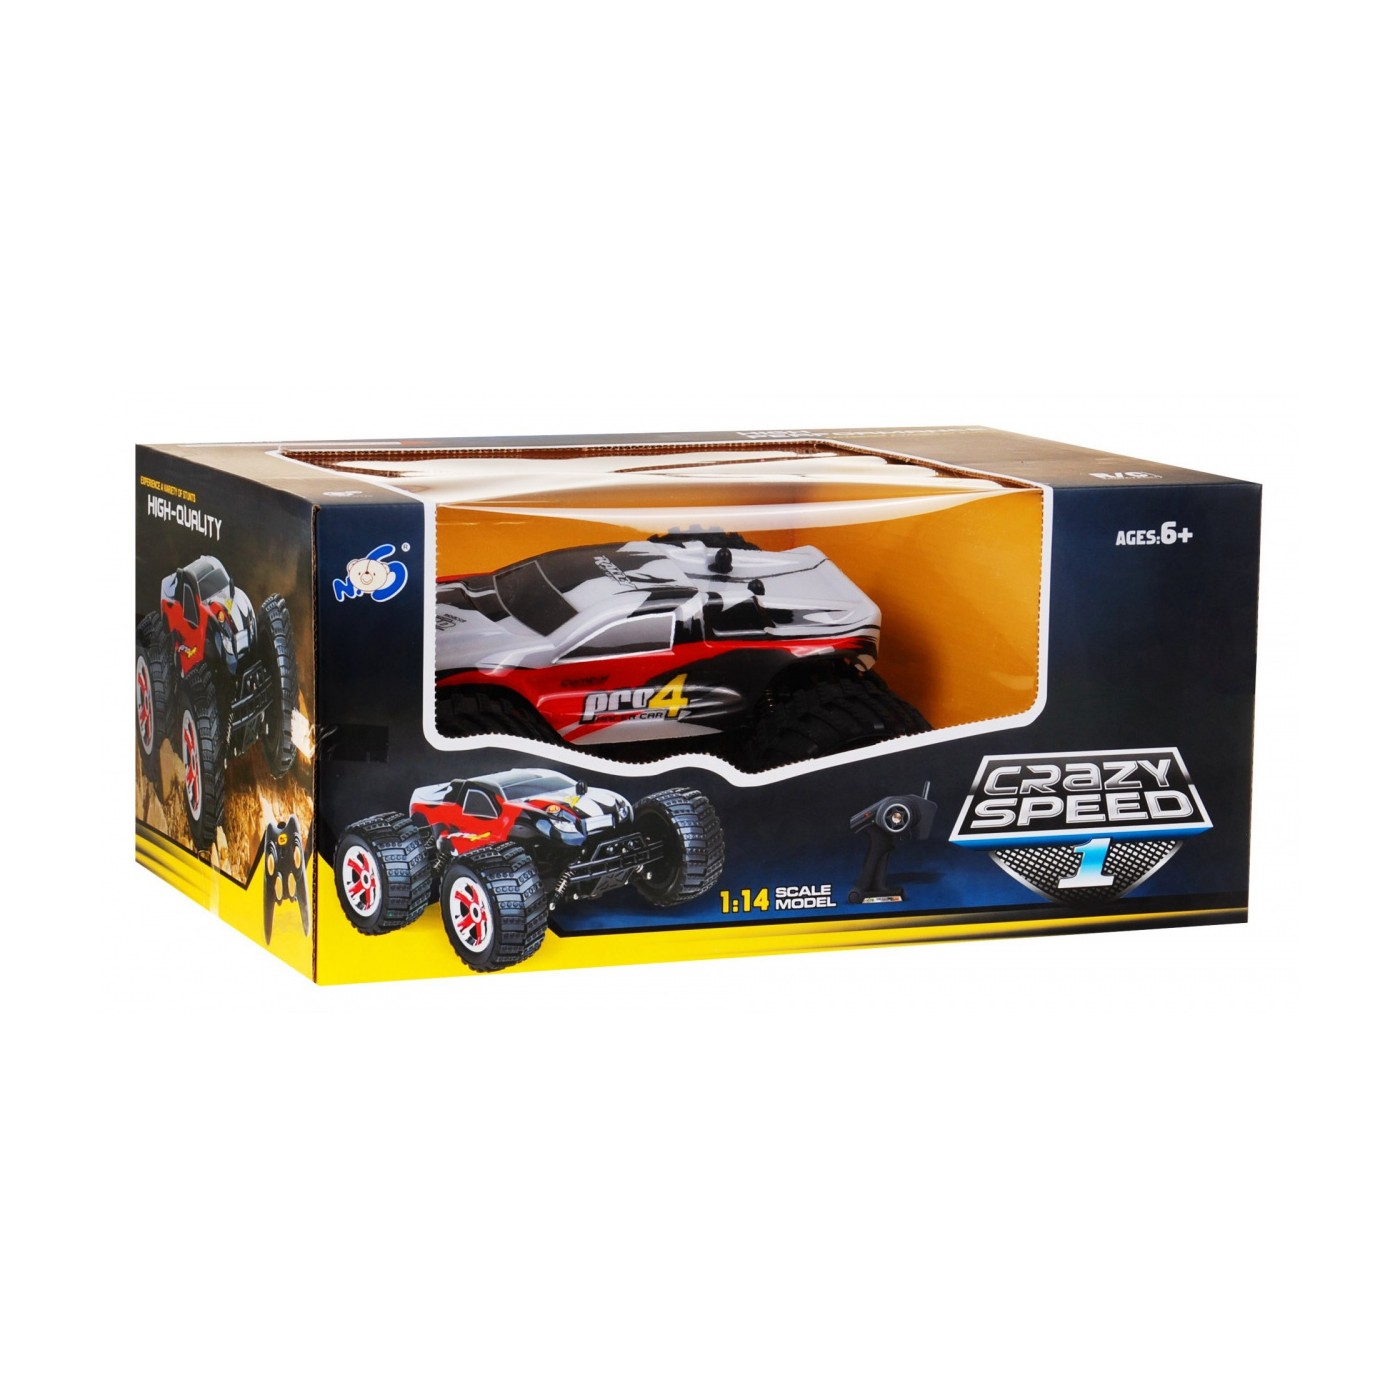 R C Off-road Buggy 2 4 G 1 14